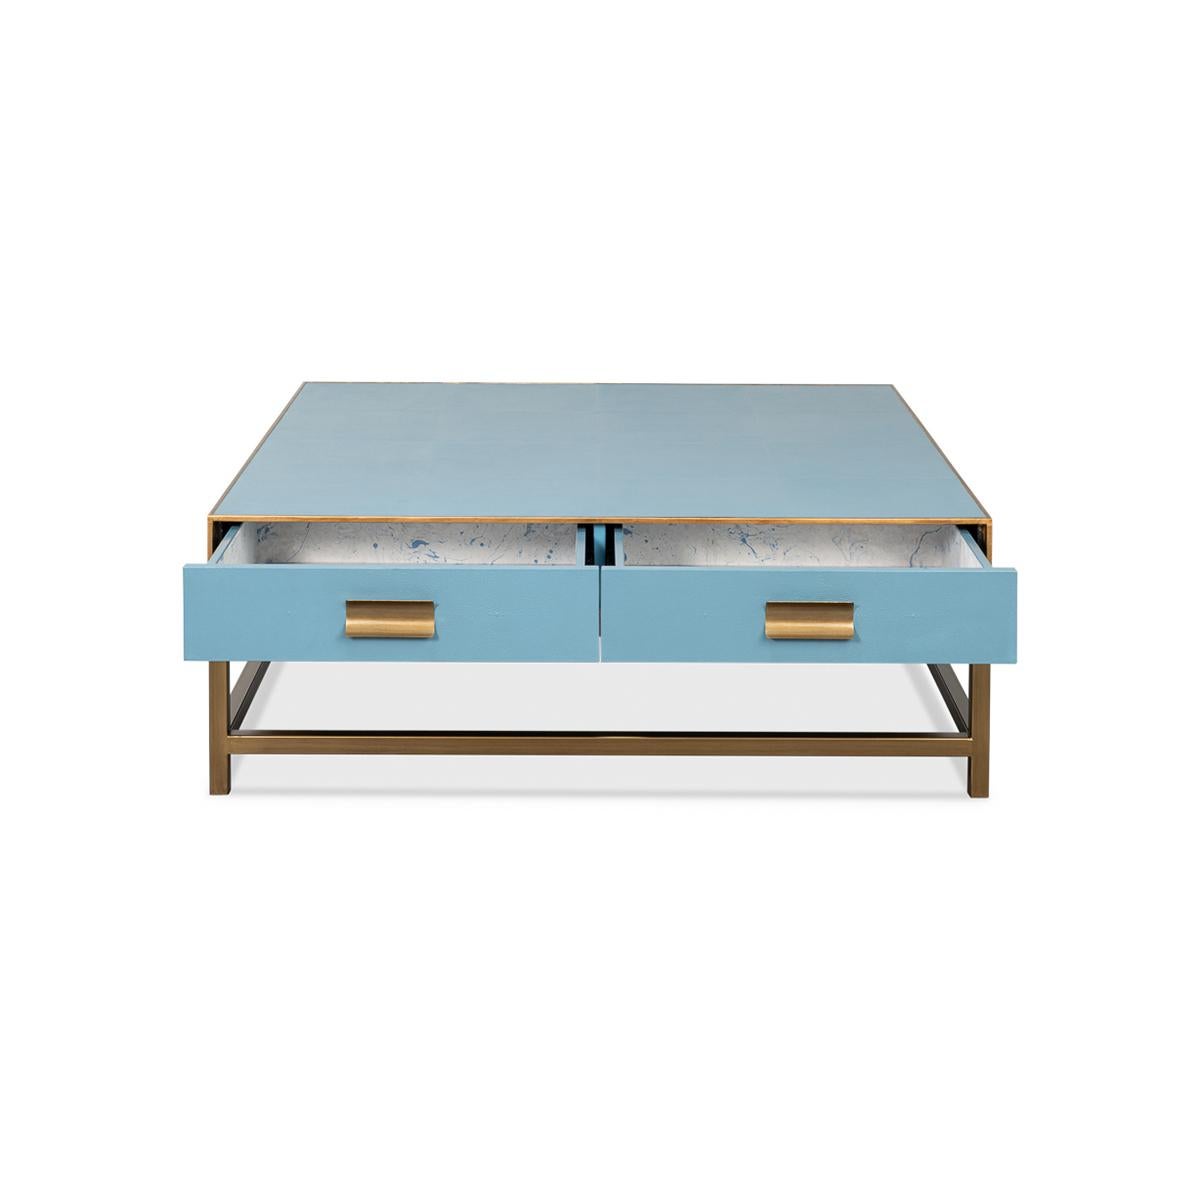 Asian Art Deco Leather Coffee Table in Chambray Blue For Sale